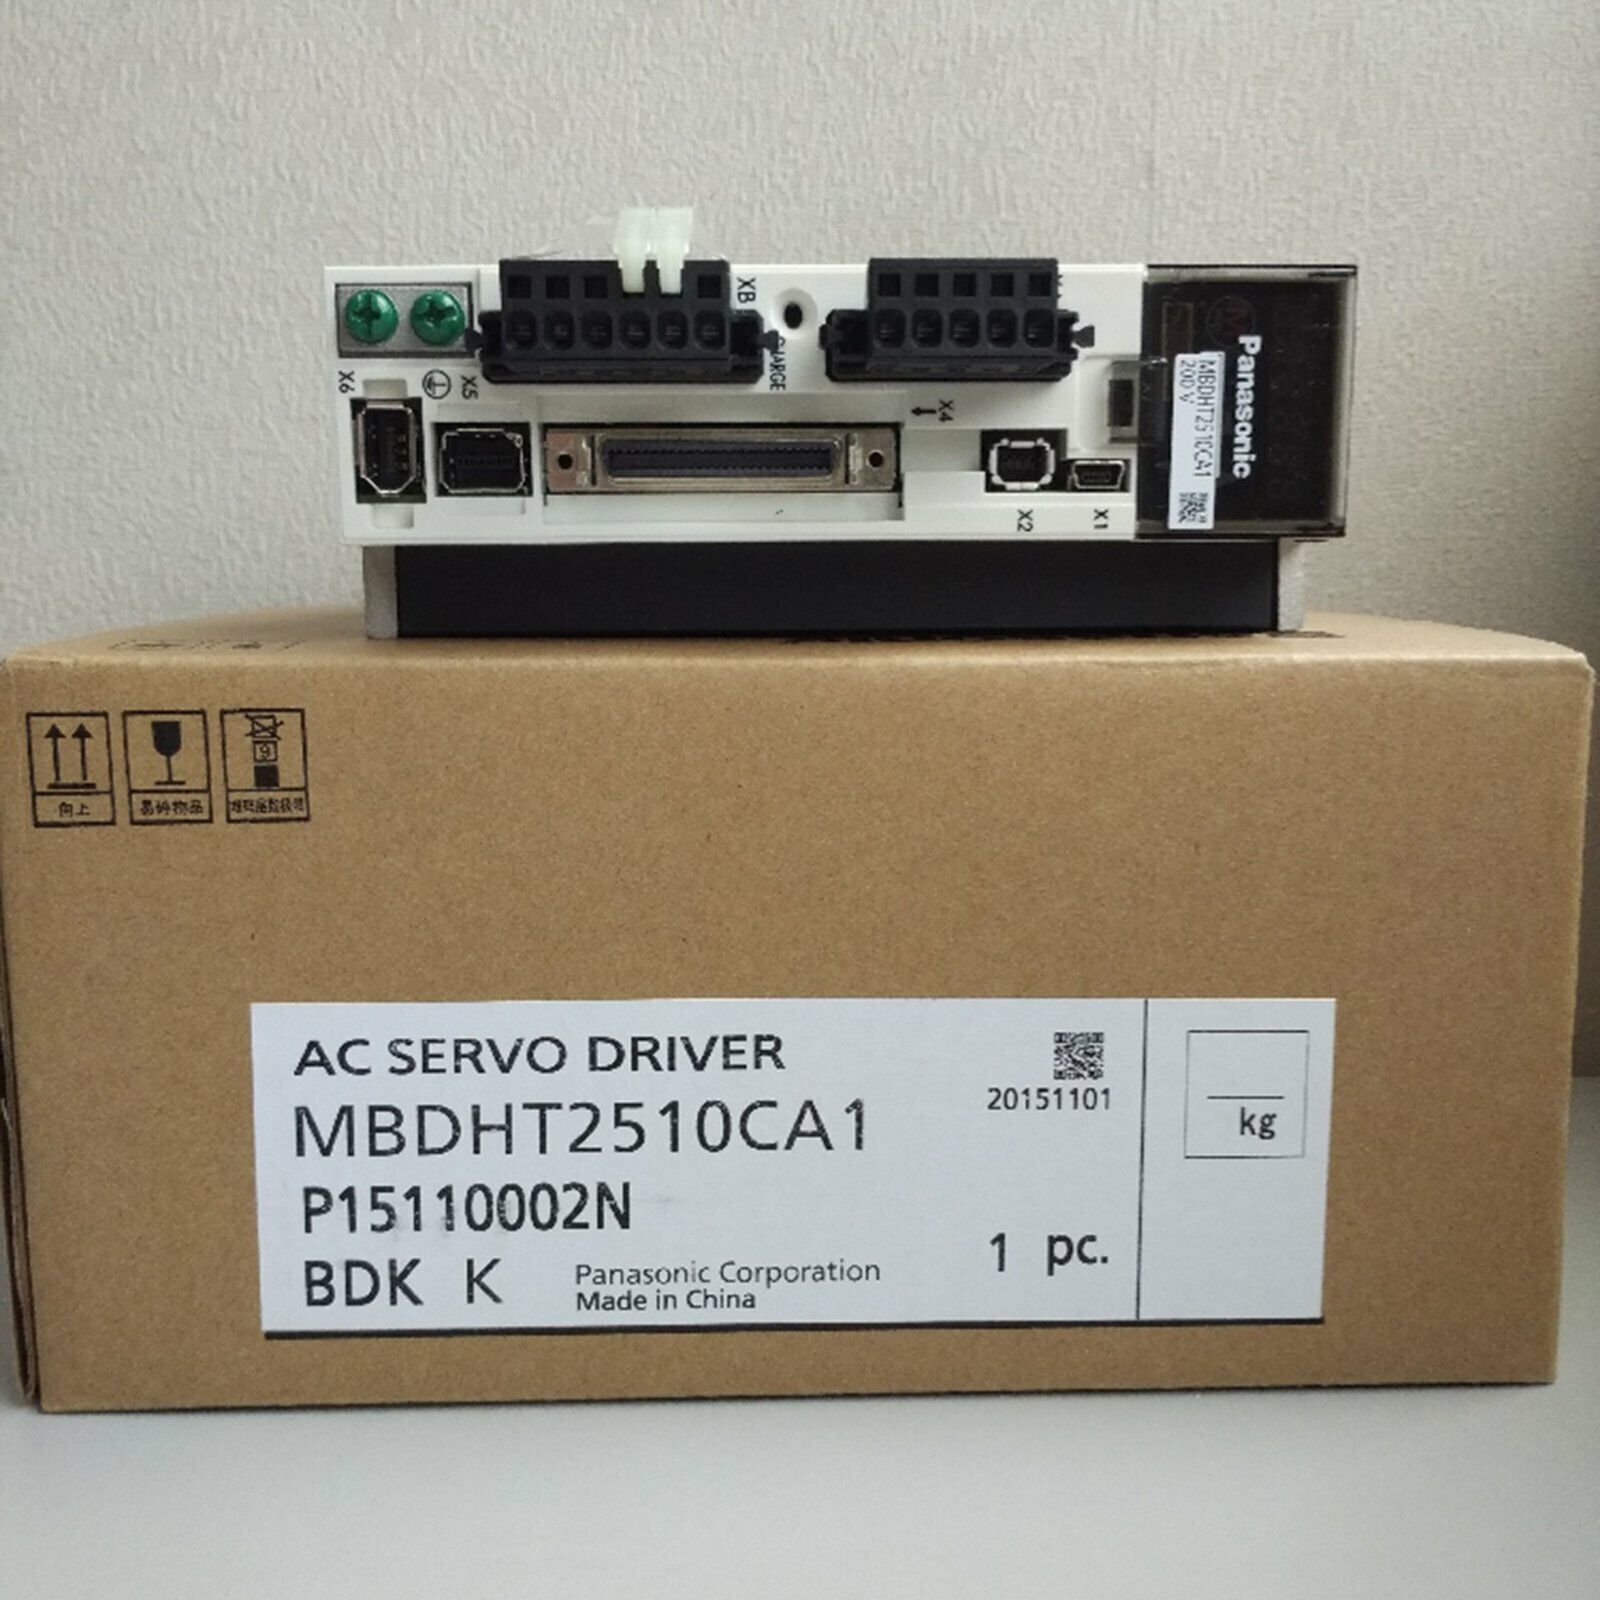 PANASONIC PLC MBDHT2510CA1 IN STOCK ONE YEAR WARRANTY FAST DELIVERY 1PCS NIB